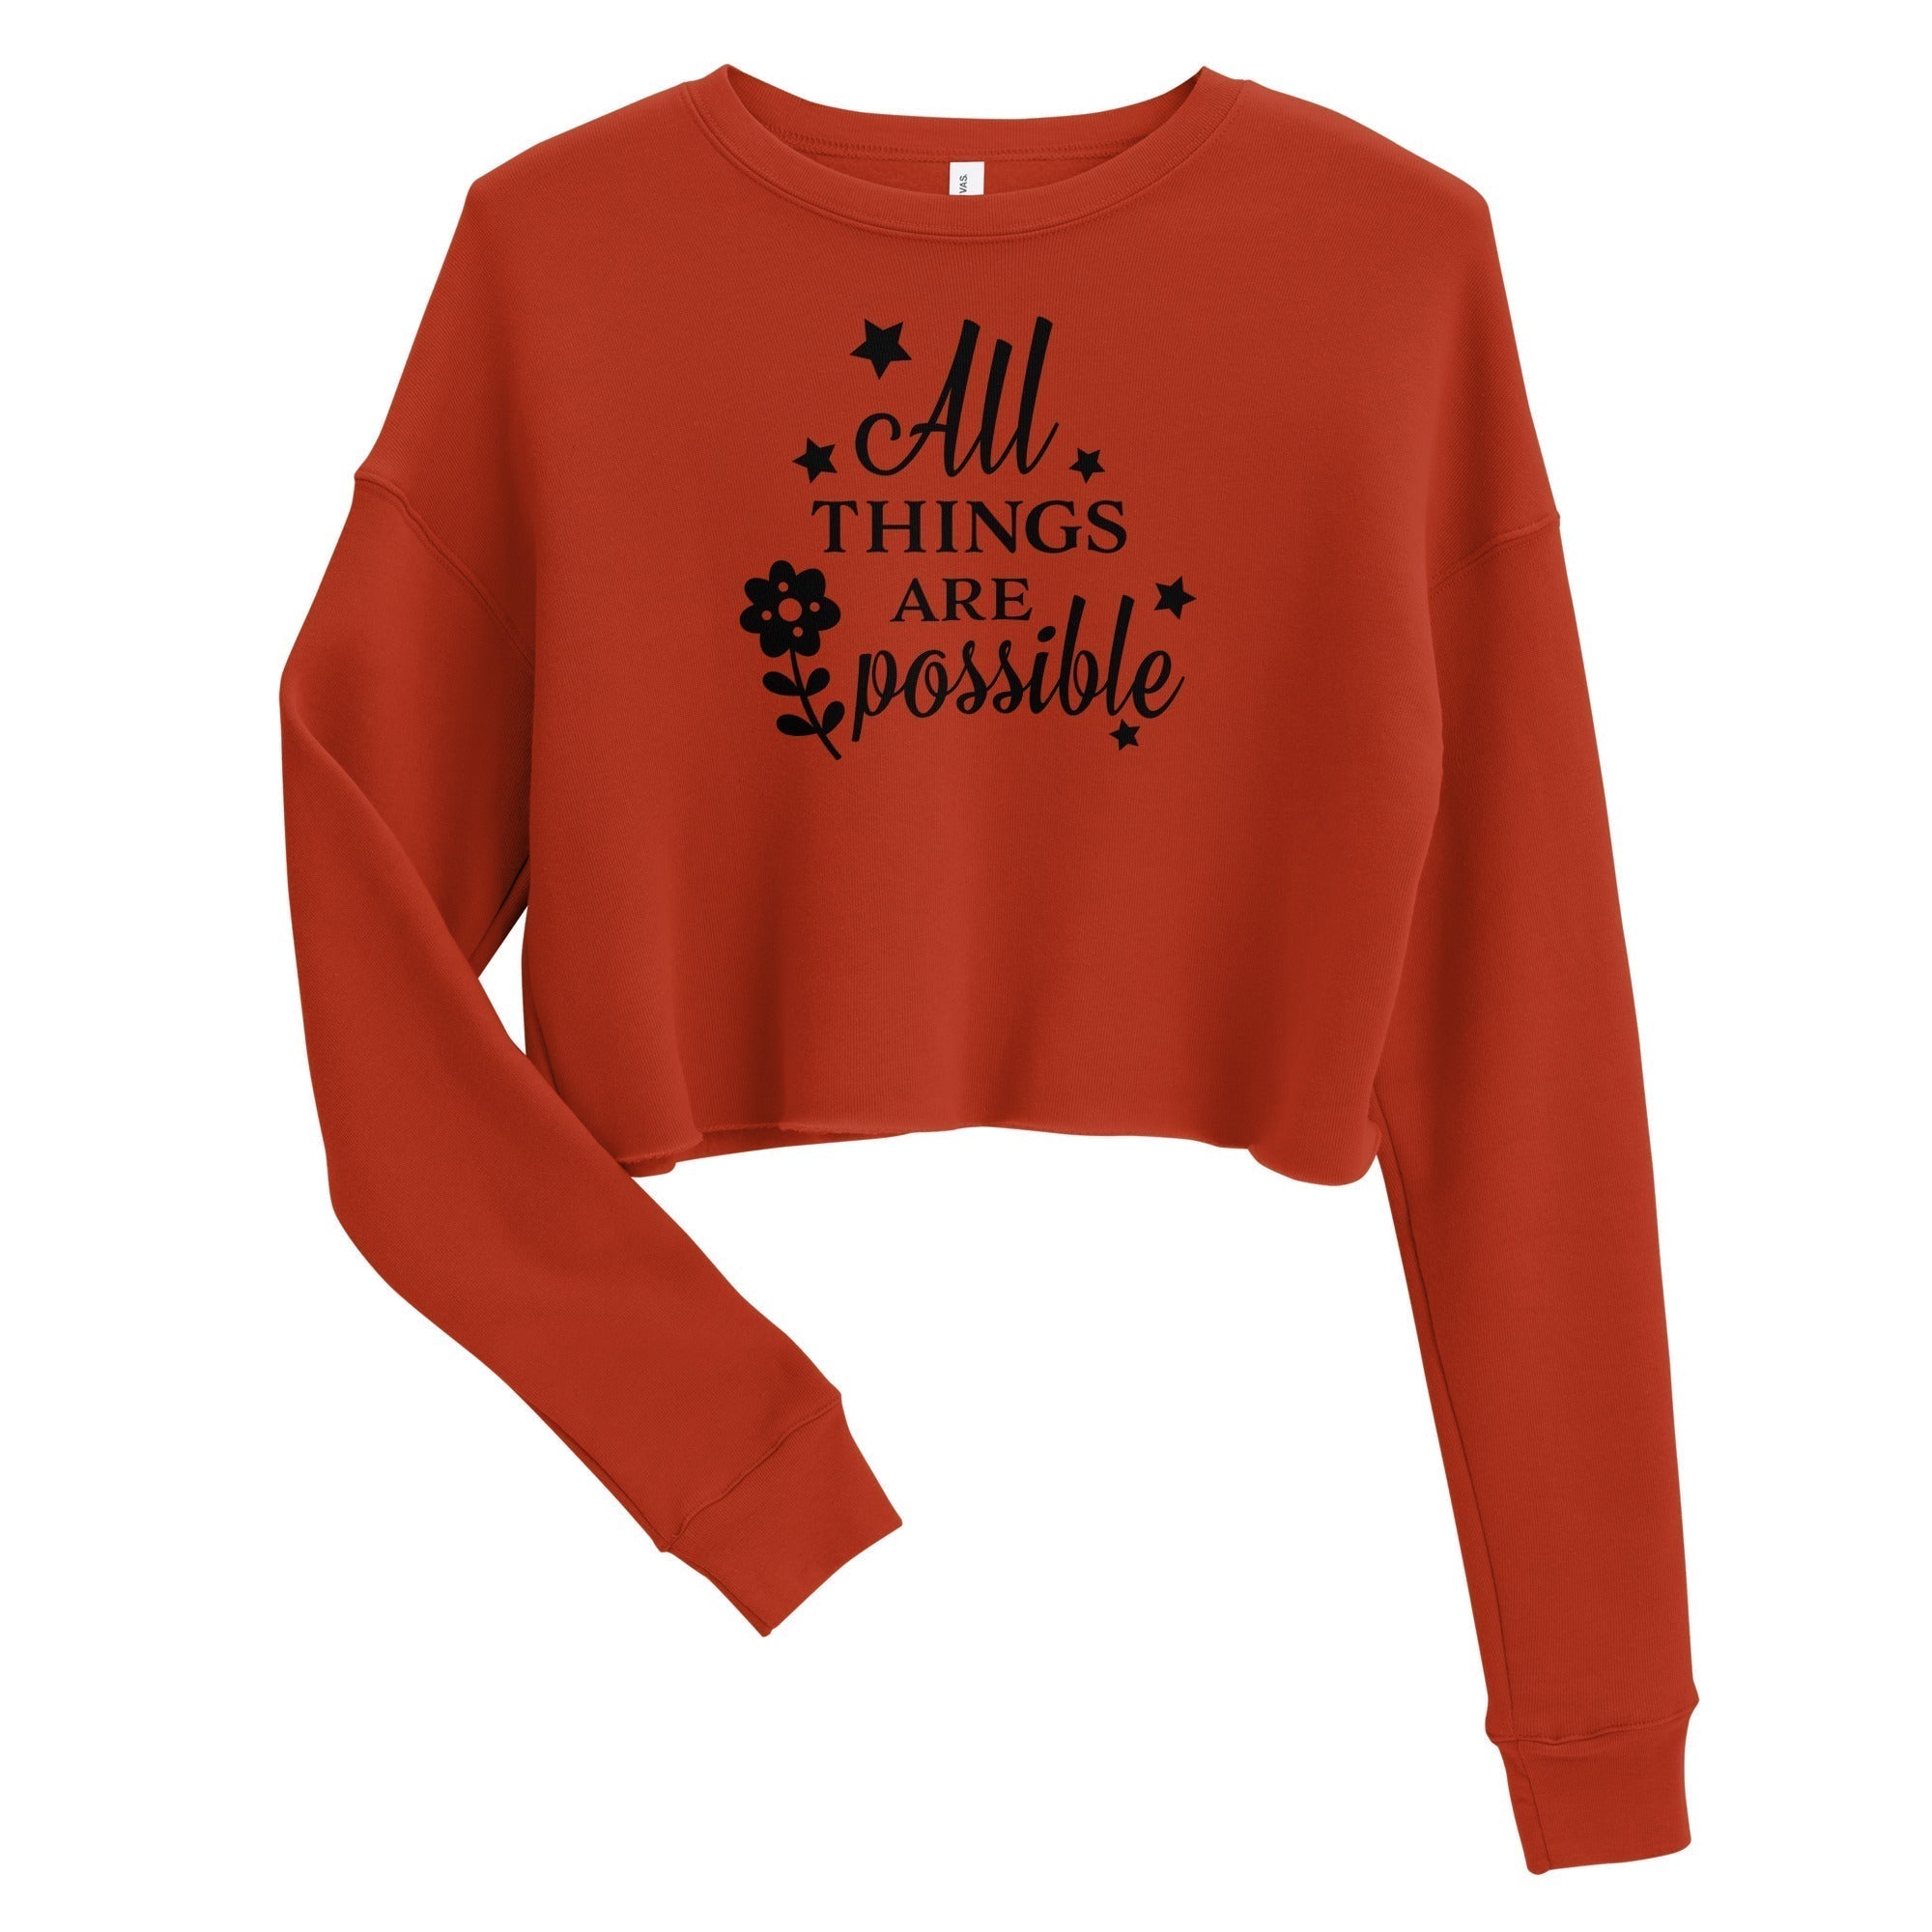 Women's Cropped Sweatshirt - All Things Are Possible - GRAPHIC T-SHIRTS